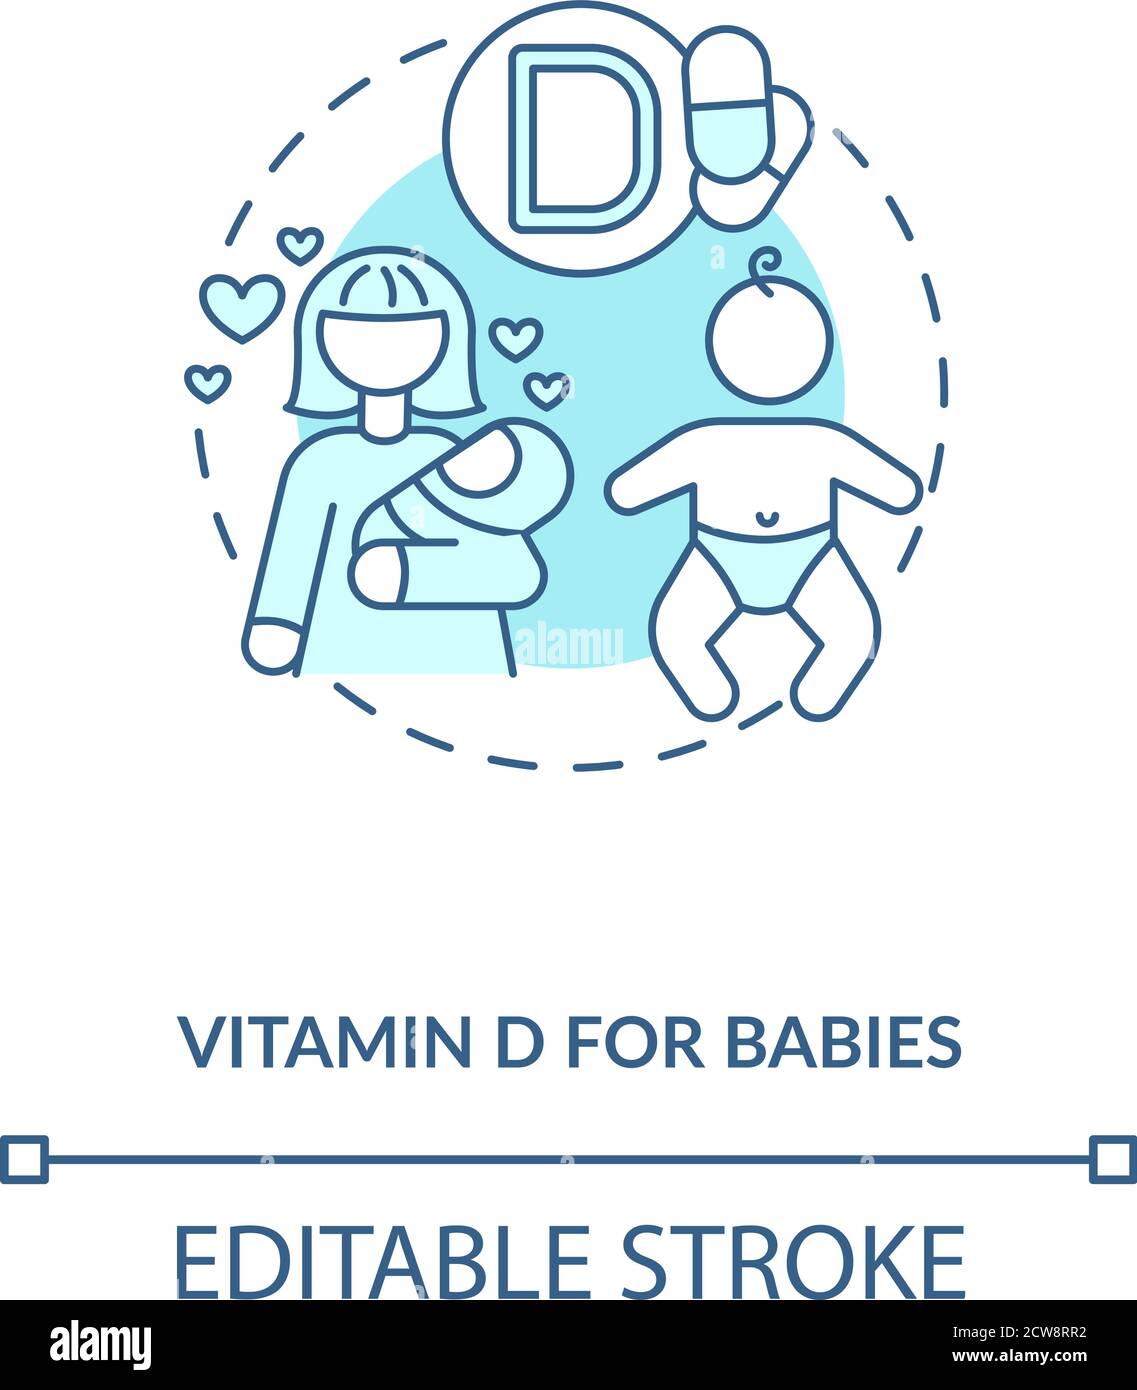 Vitamin D for babies concept icon Stock Vector